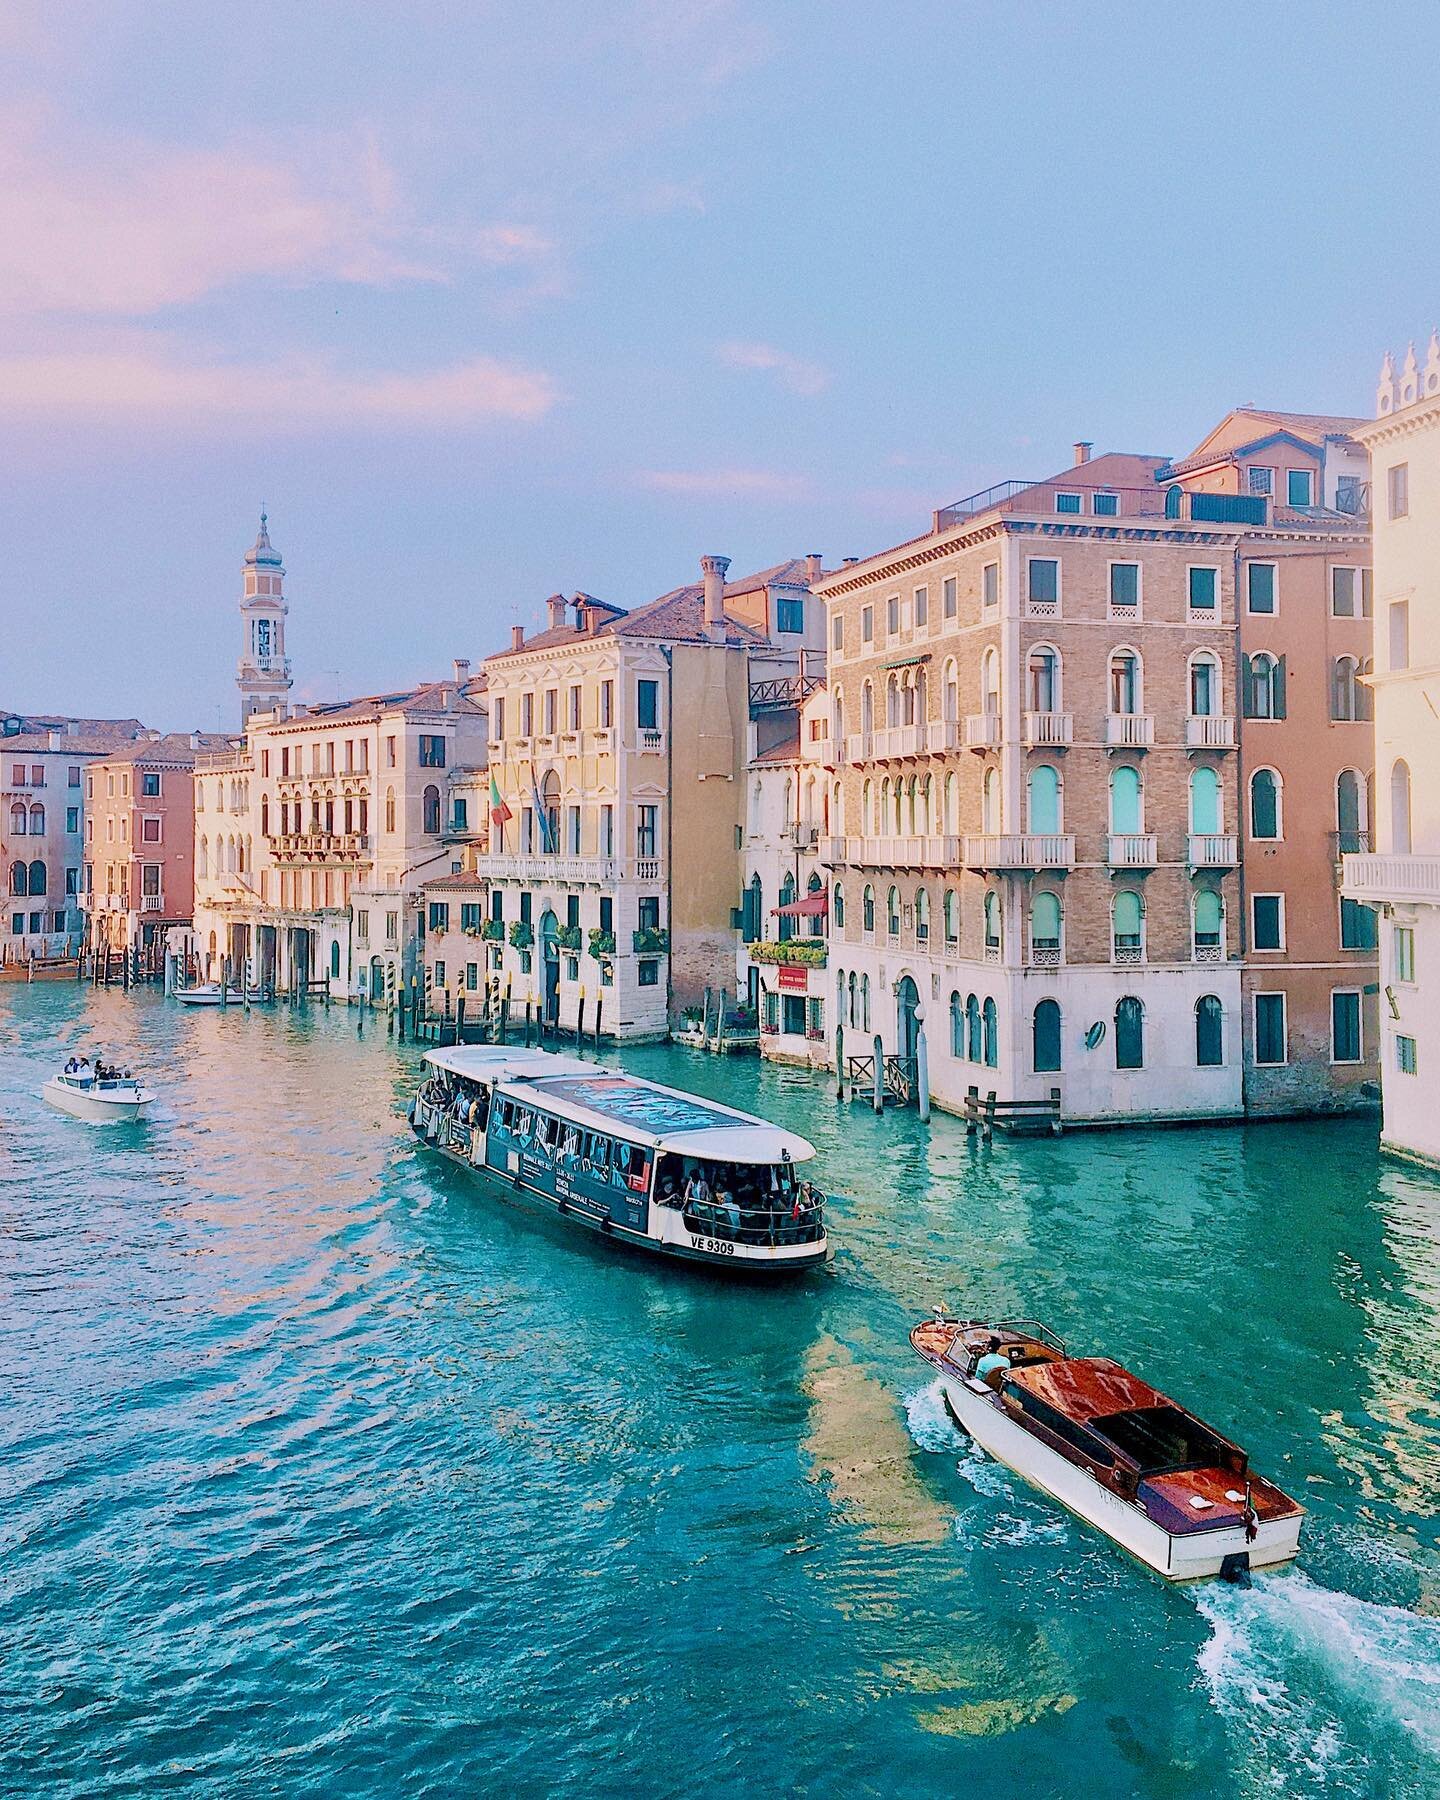 Venice, known also as &ldquo;The Floating City,&rdquo; is arguably one of the most picturesque cities in Italy. 

Originally, the city was built on millions of petrified logs that were driven into the ground.&nbsp;

The 118 islands that make up Venic